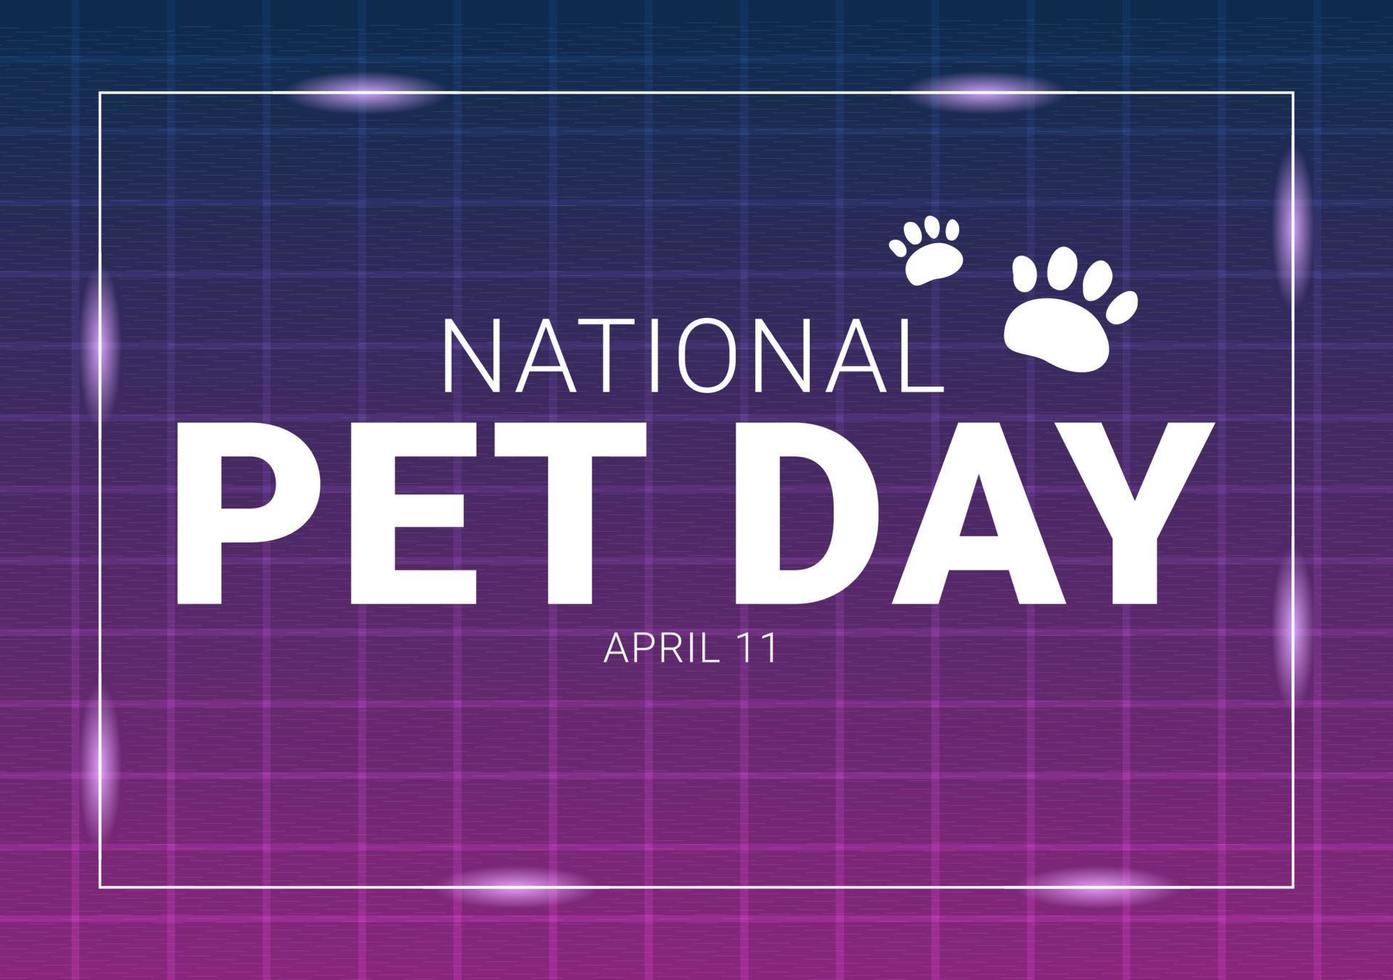 National Pet Day on April 11 Illustration with Cute Pets of Cats and Dogs for Web Banner or Landing Page in Flat Cartoon Hand Drawn Templates vector